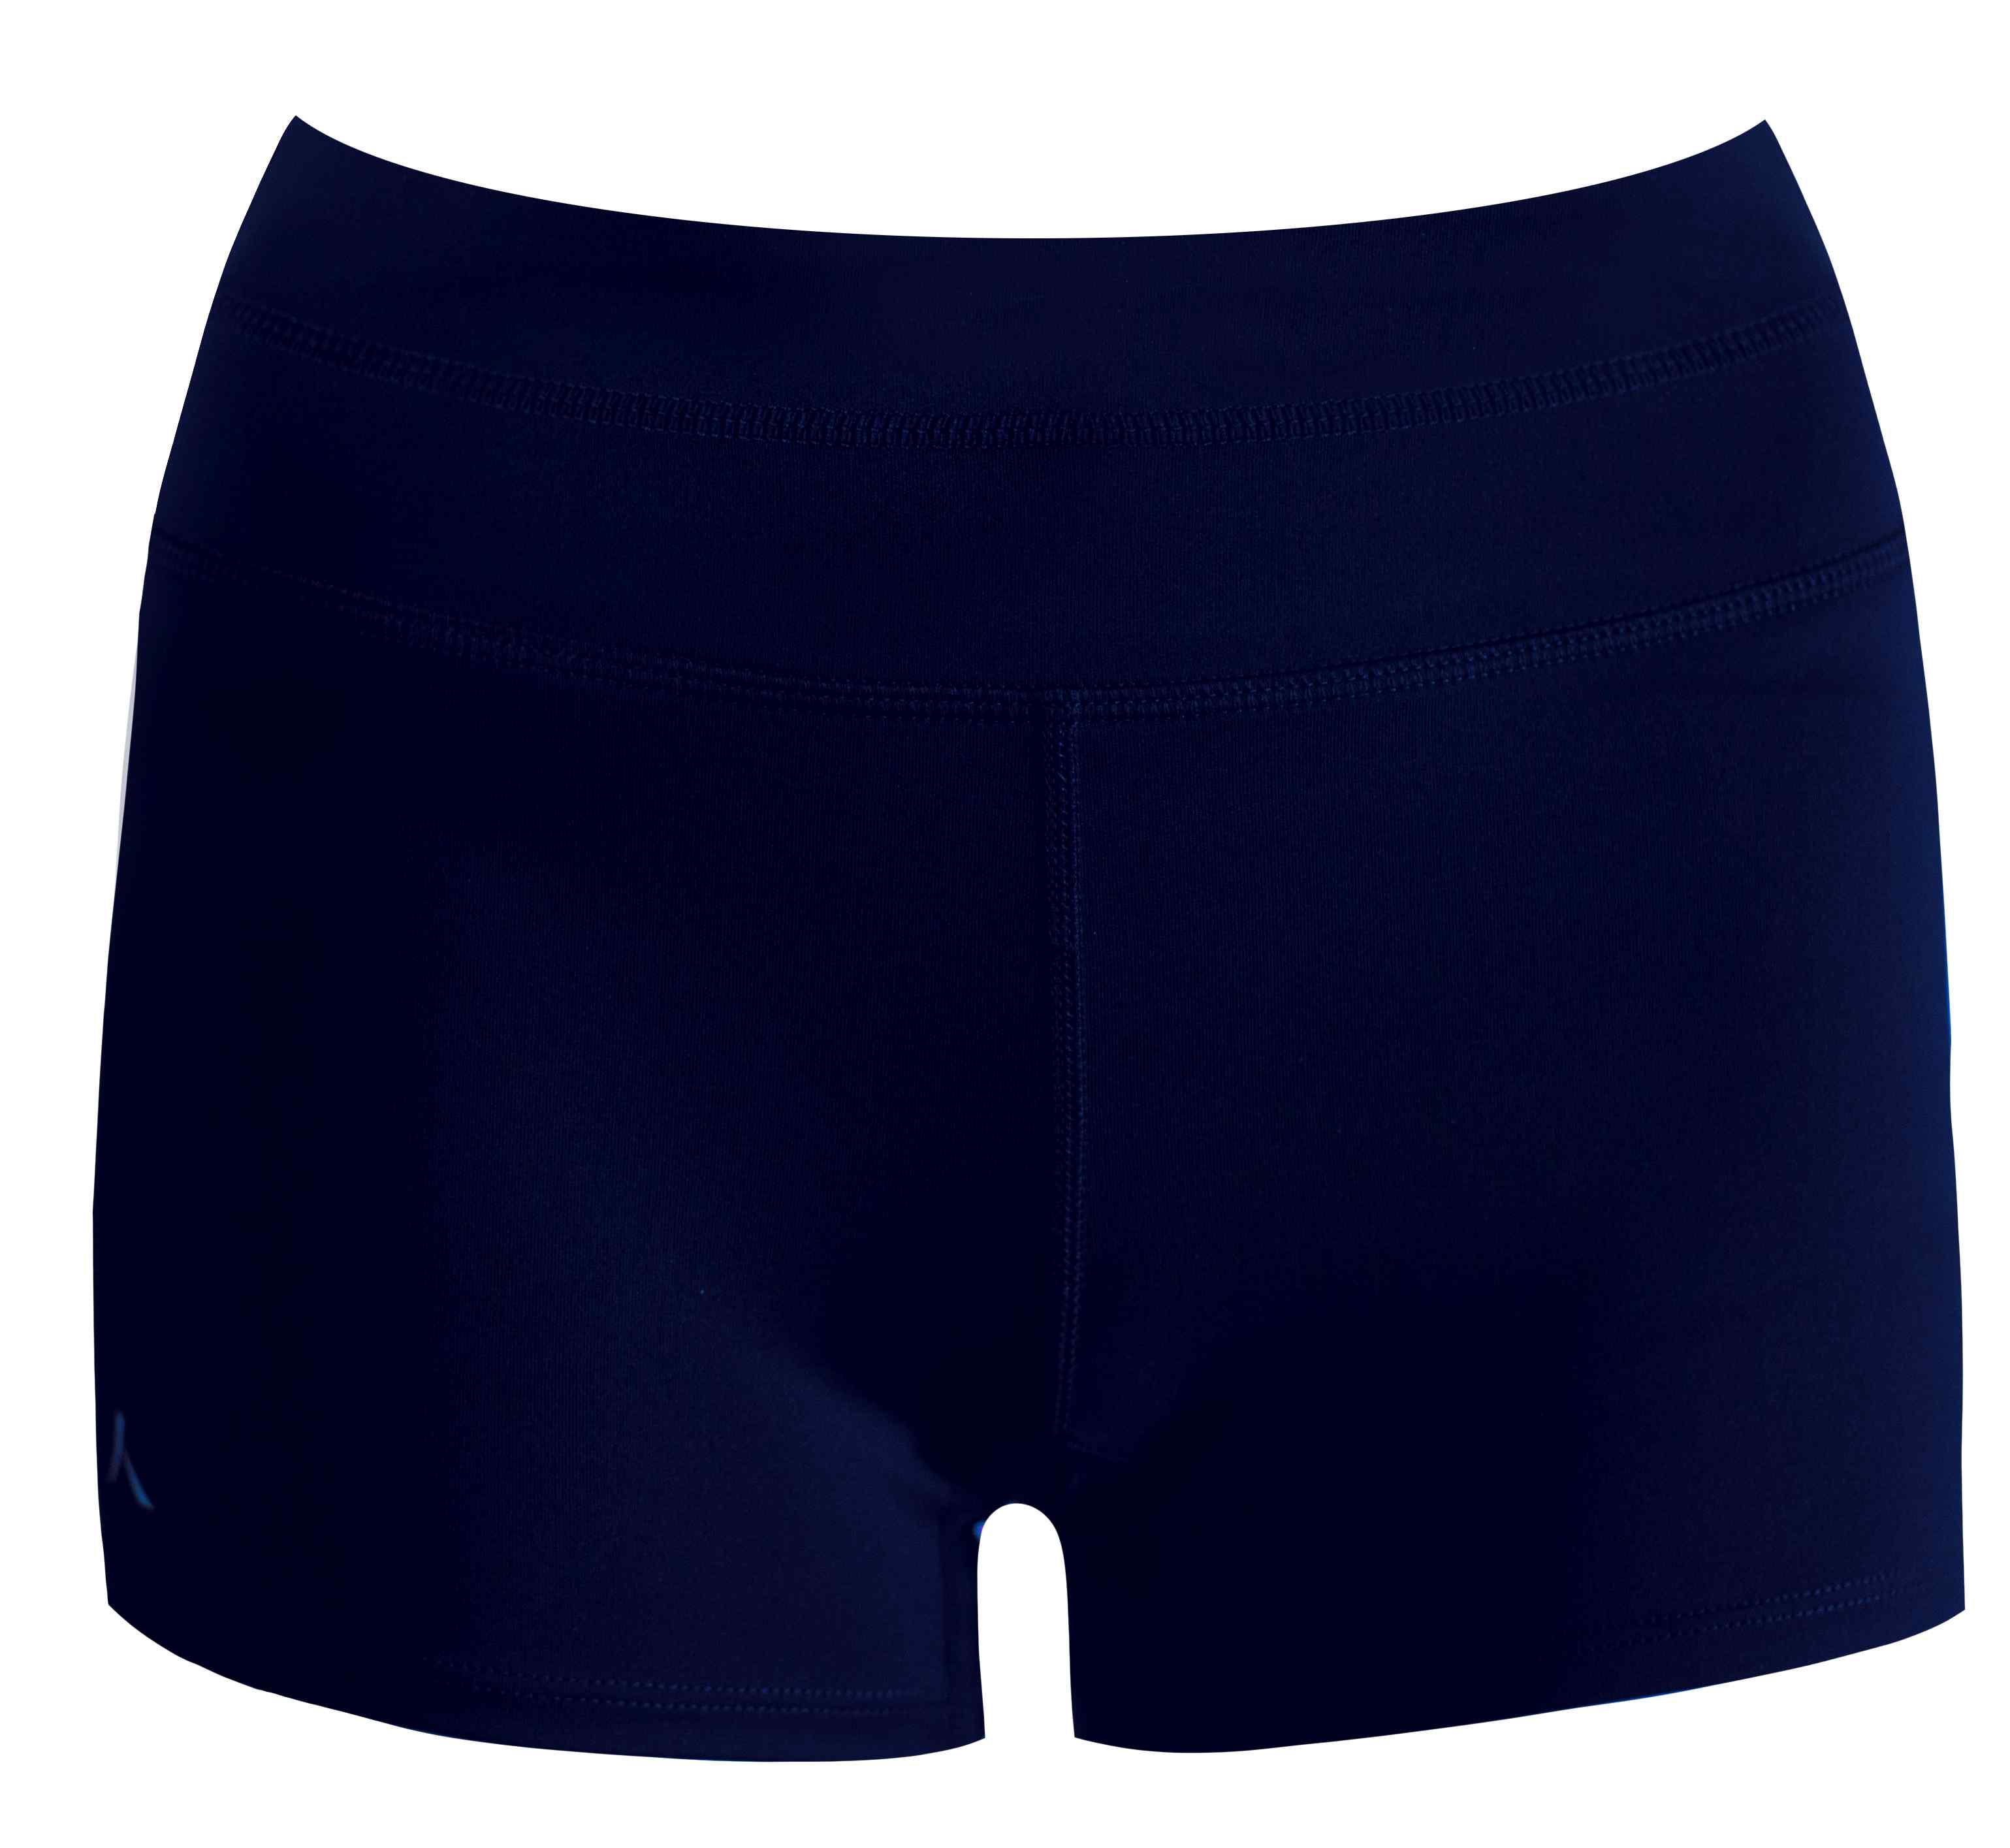 Mid Waist Blue Girls Volleyball shorts, Skin Fit at Rs 200/piece in  Kovilpatti